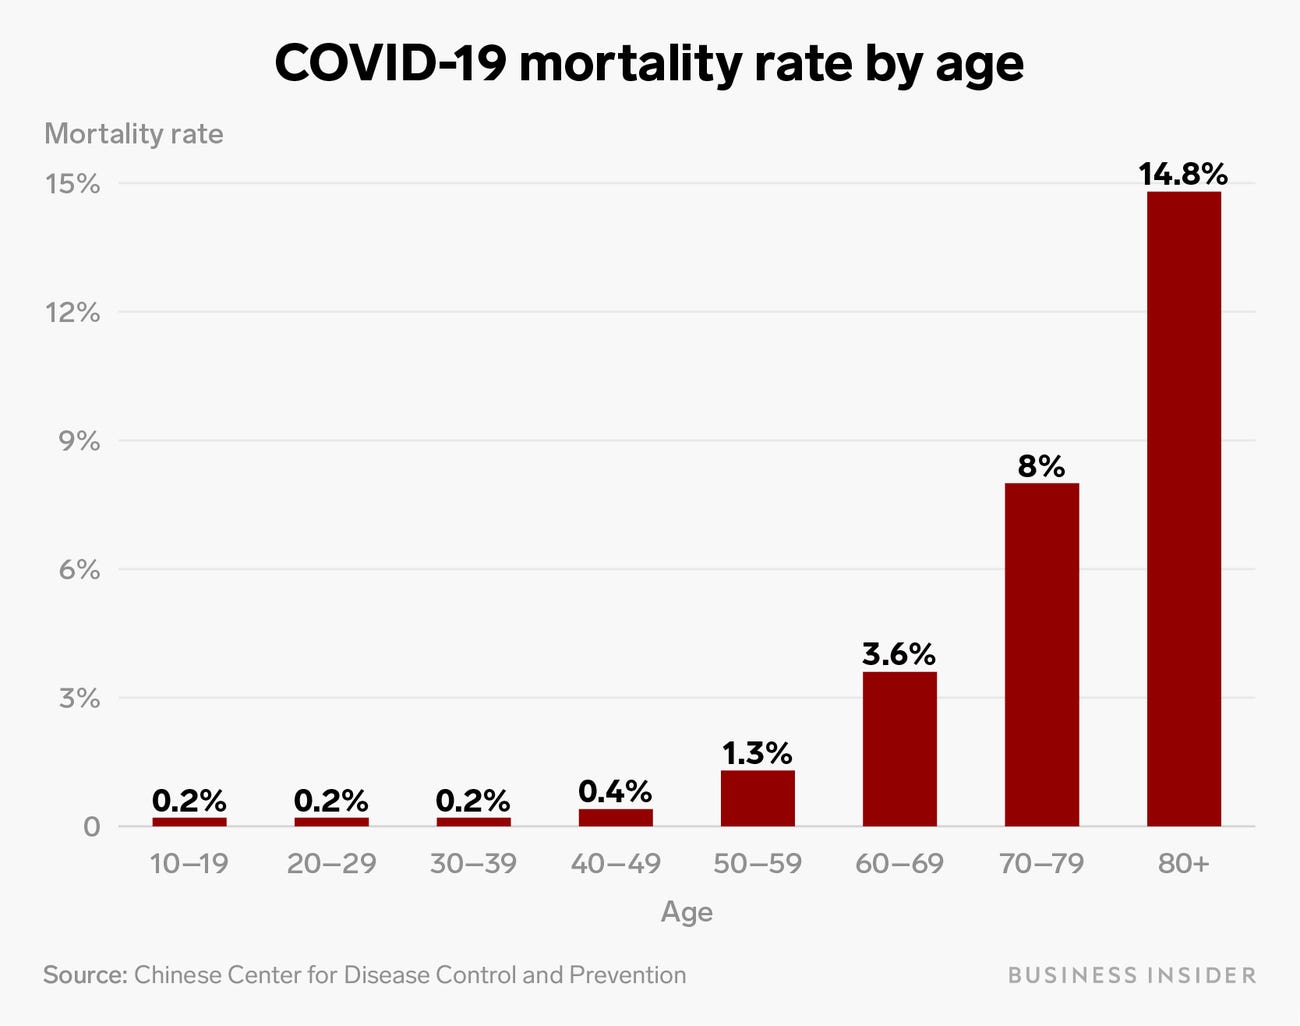 Mortality rate of COVID-19 by age bracket